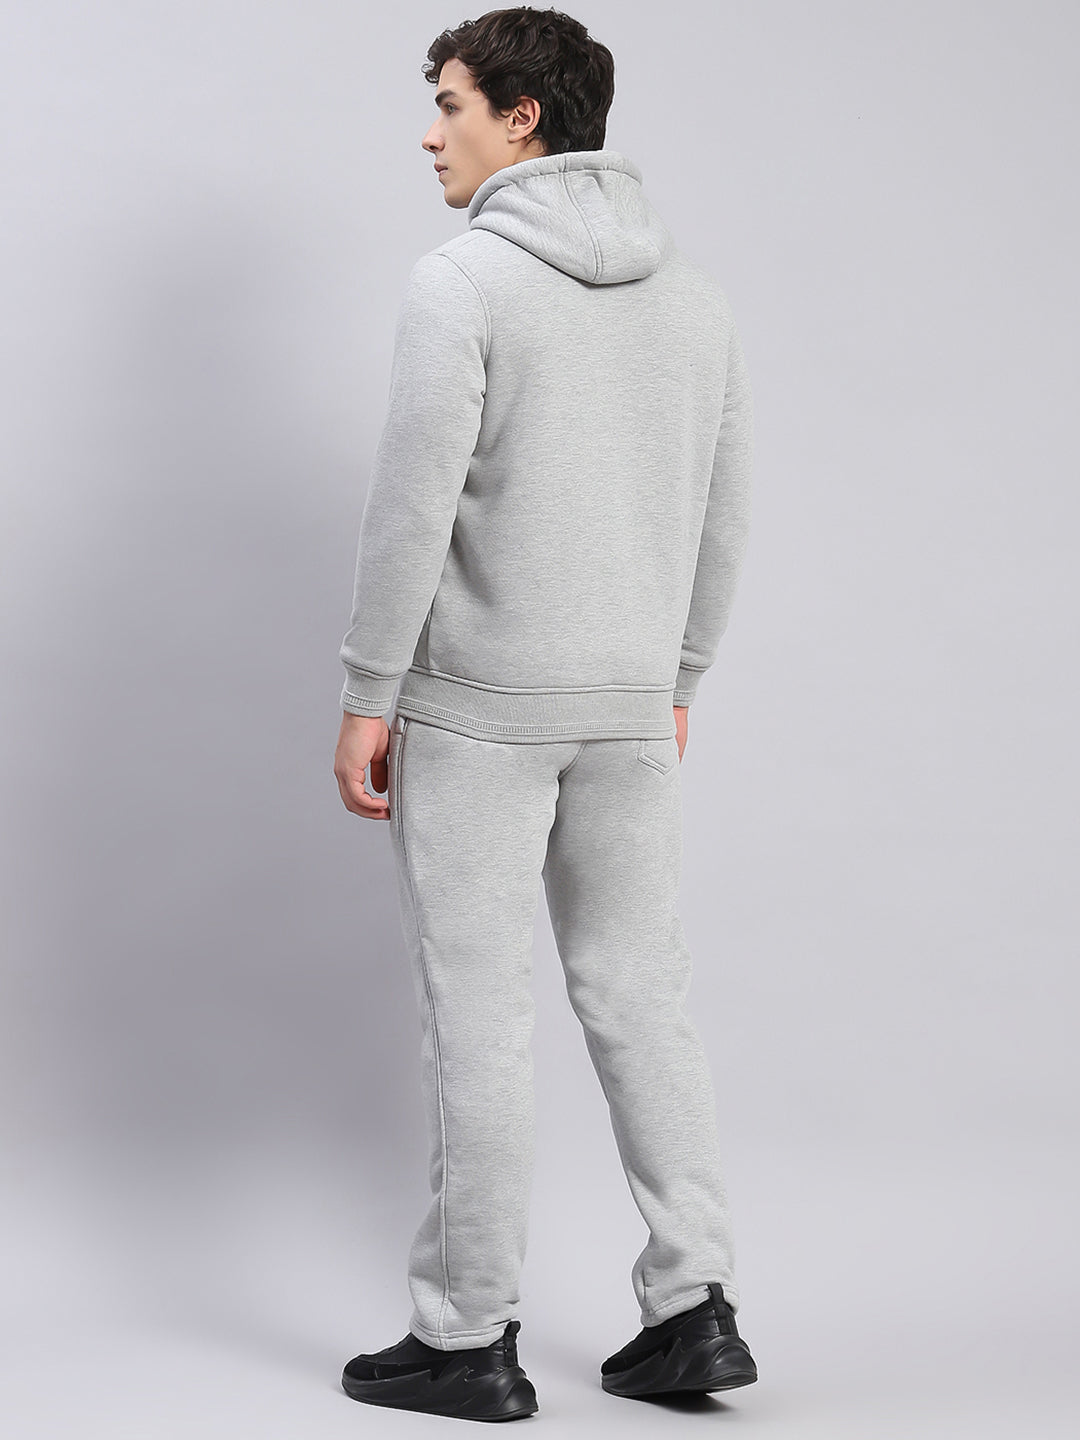 Men Grey Solid Hooded Full Sleeve Tracksuits